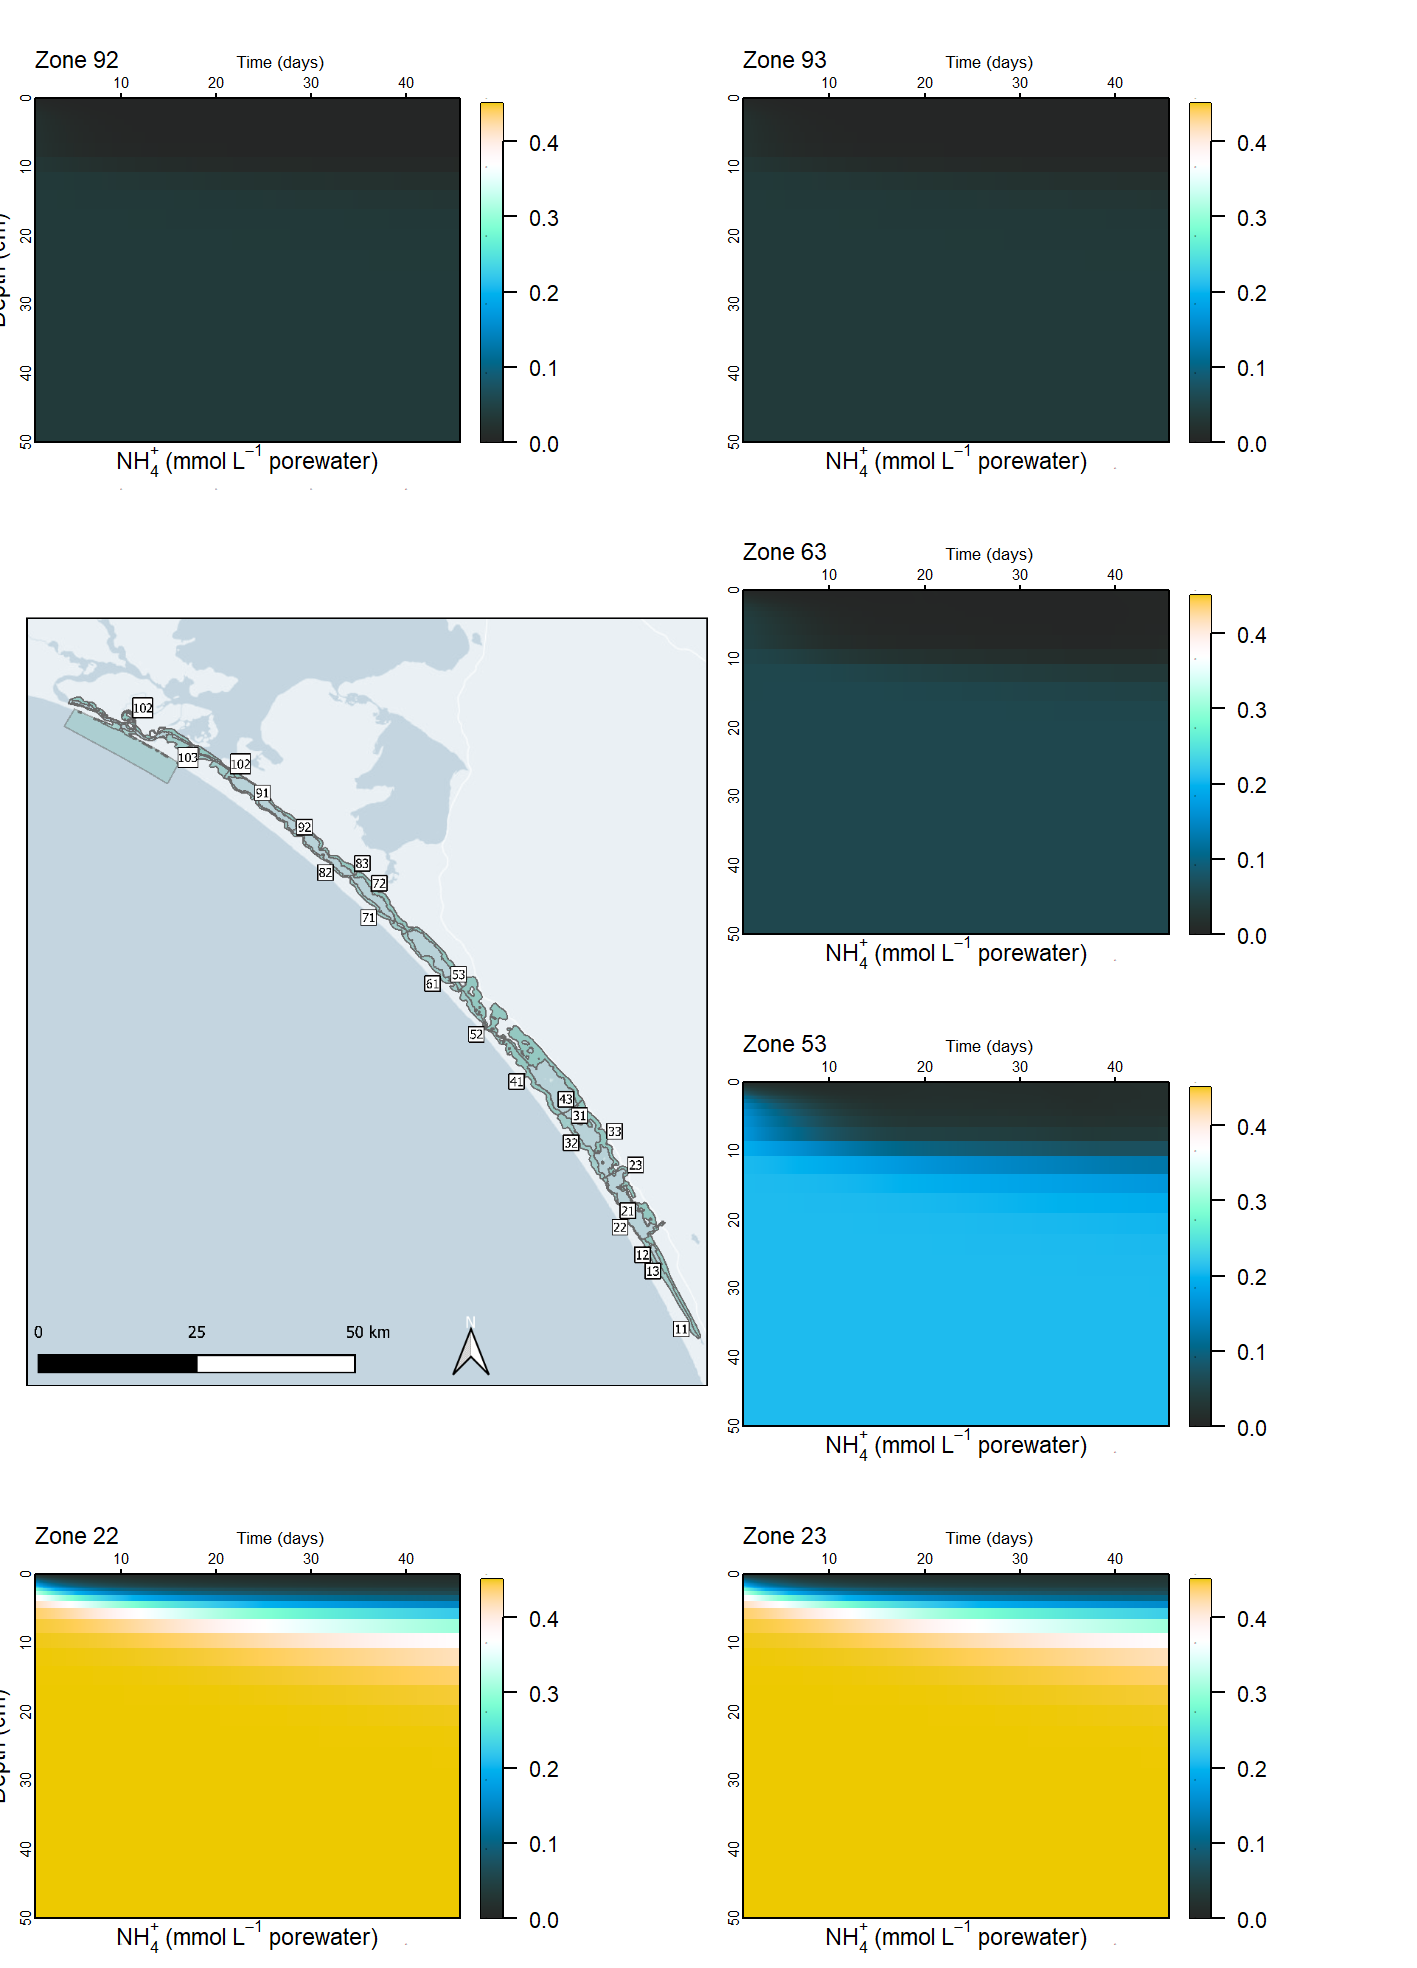 Simulated sediment concentrations of ammonium in different zones along the length of the lagoon.